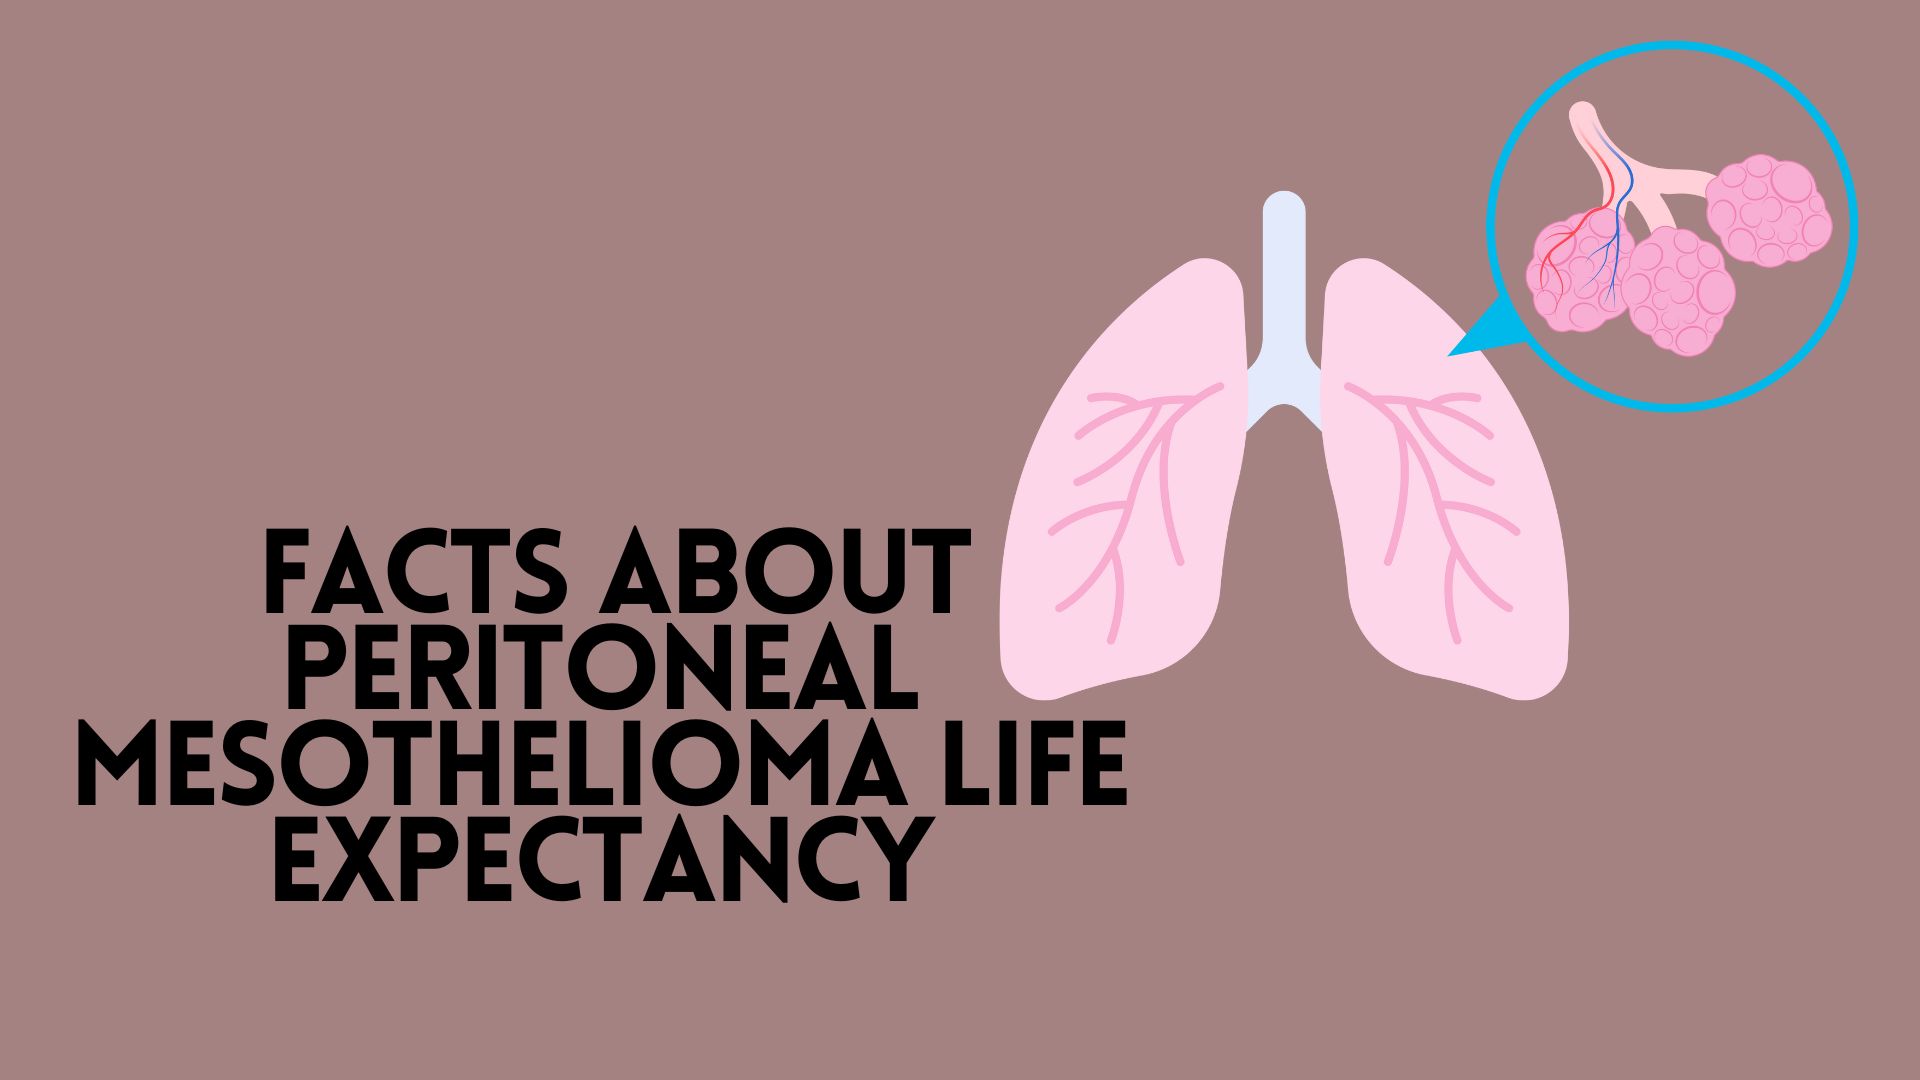 Facts About Peritoneal Mesothelioma Life Expectancy